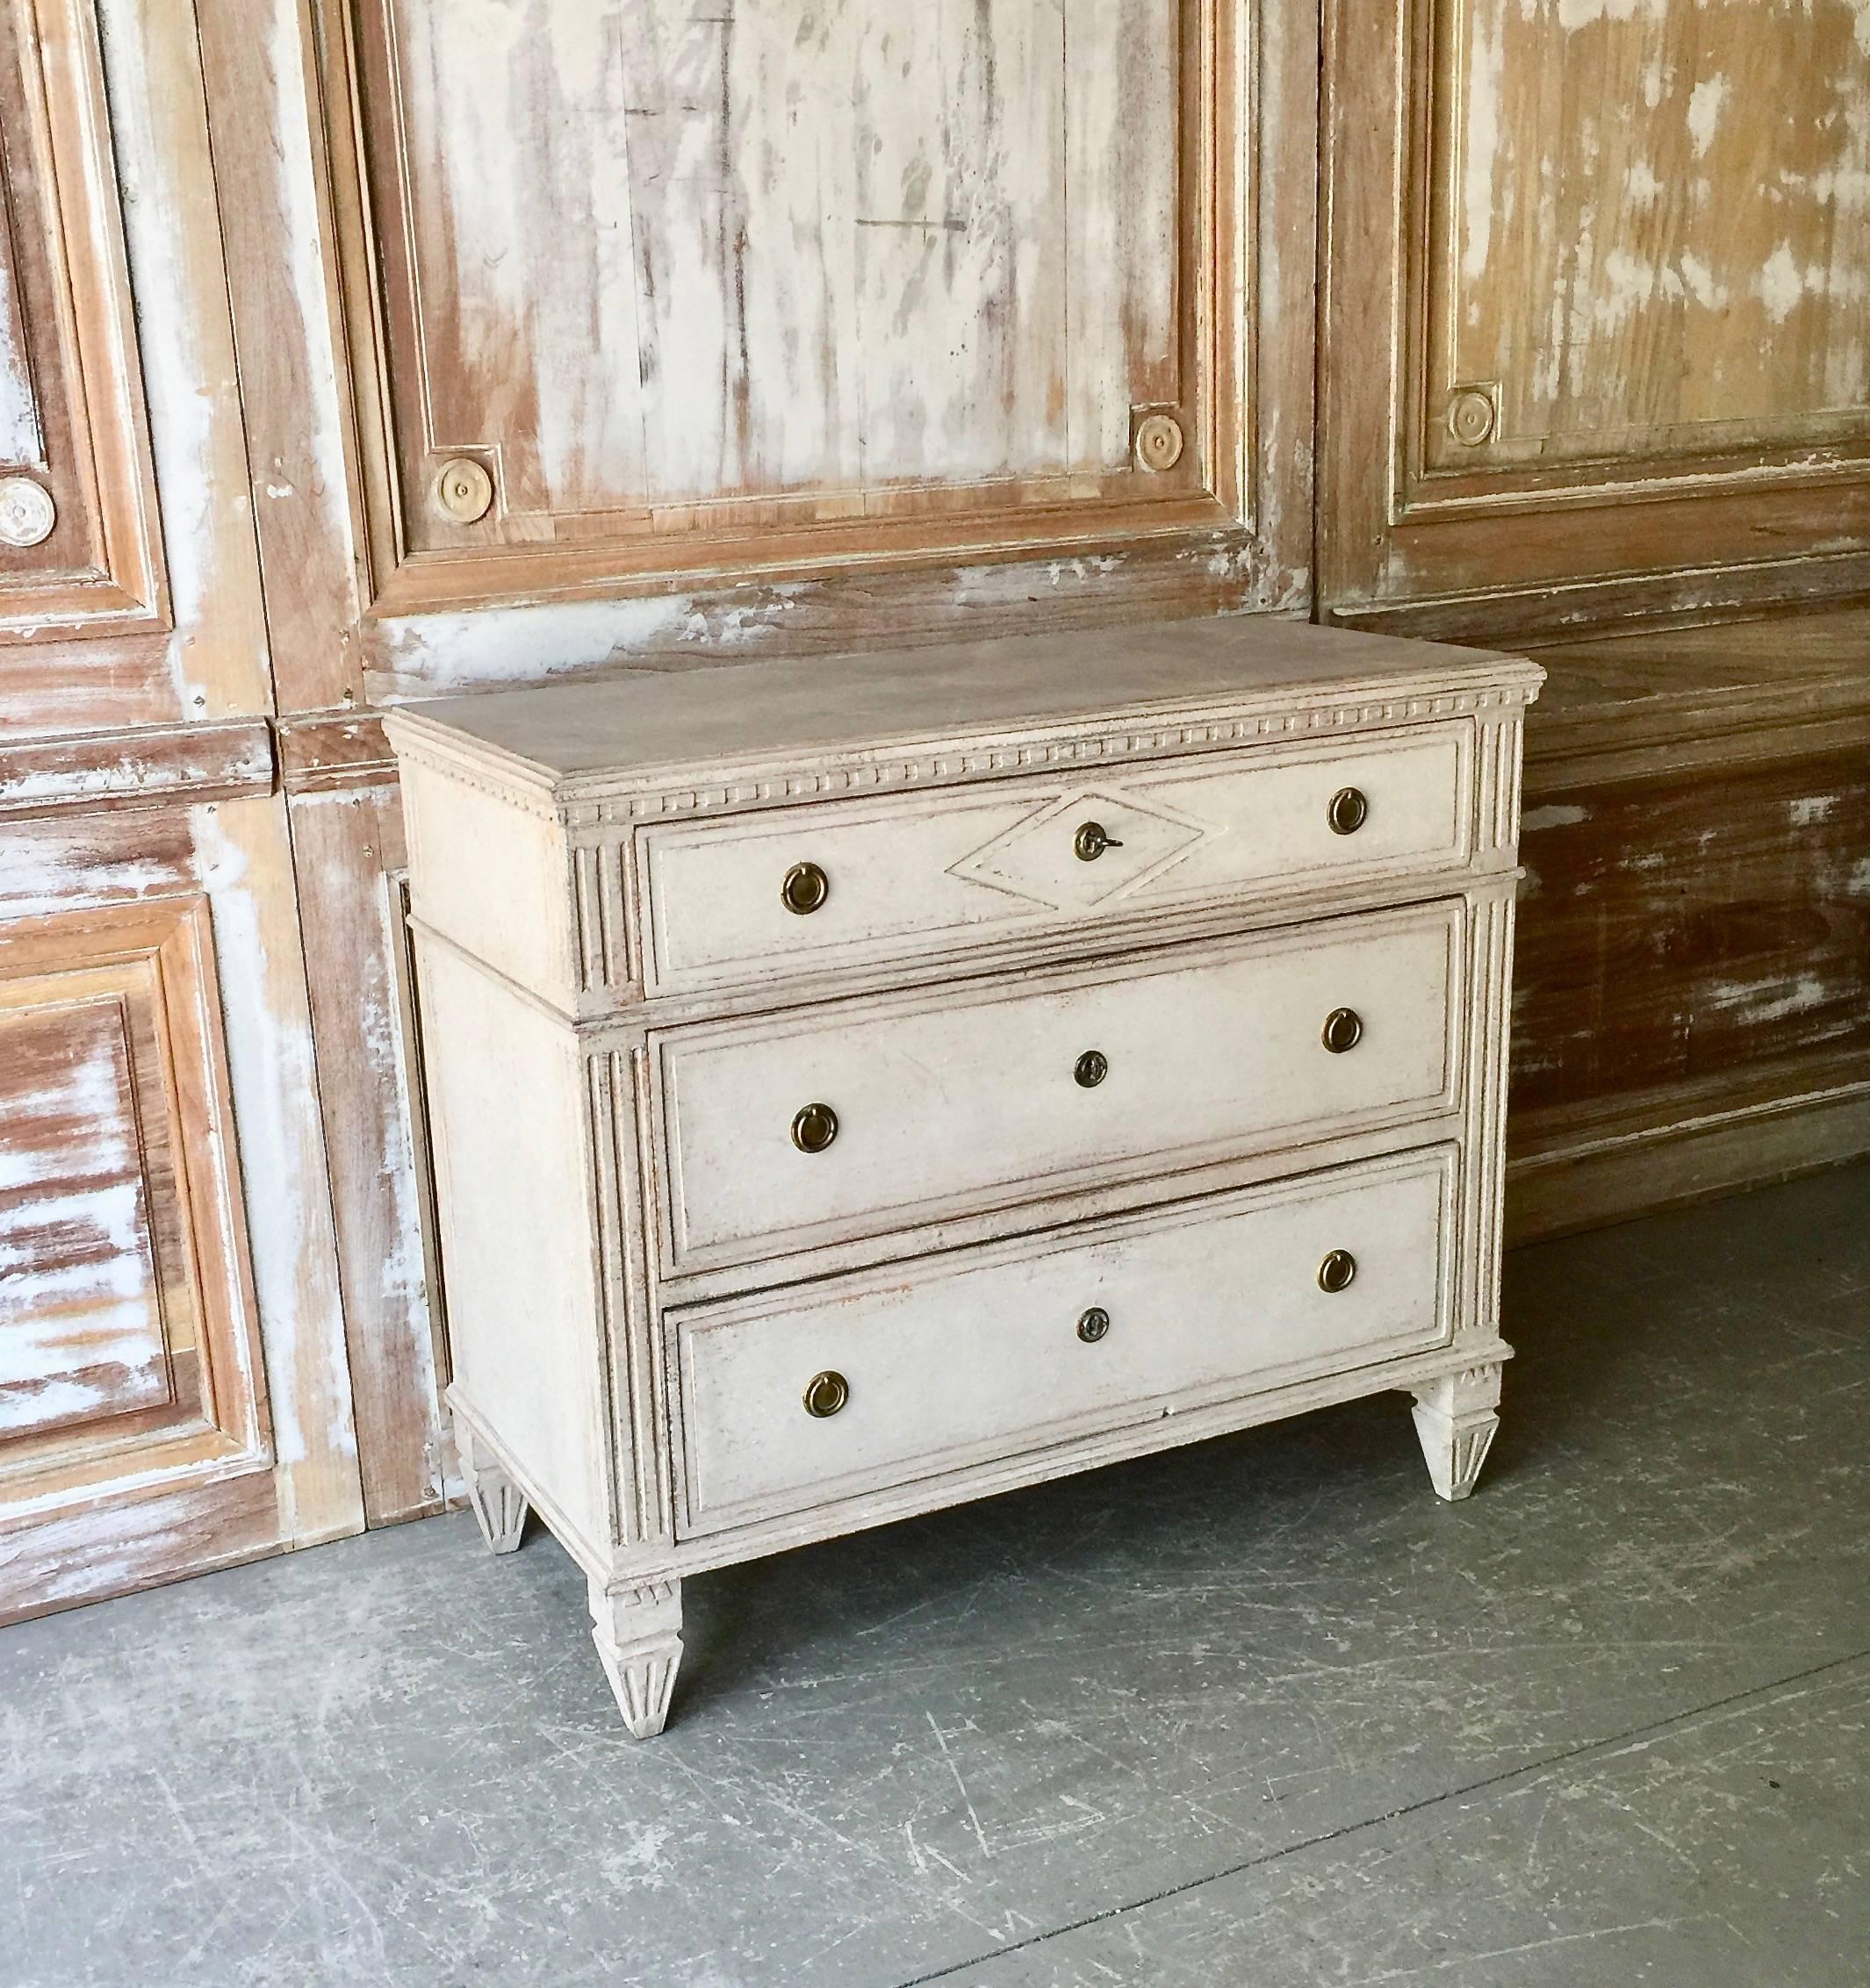 Gustavian period chest of drawers with Classic dental trim to the top, canted posts with fluted details, raised diamond shaped lozenge on upper drawer front and fluted tapered feet under the darker gray-shaped marbleized top,
Sweden, circa